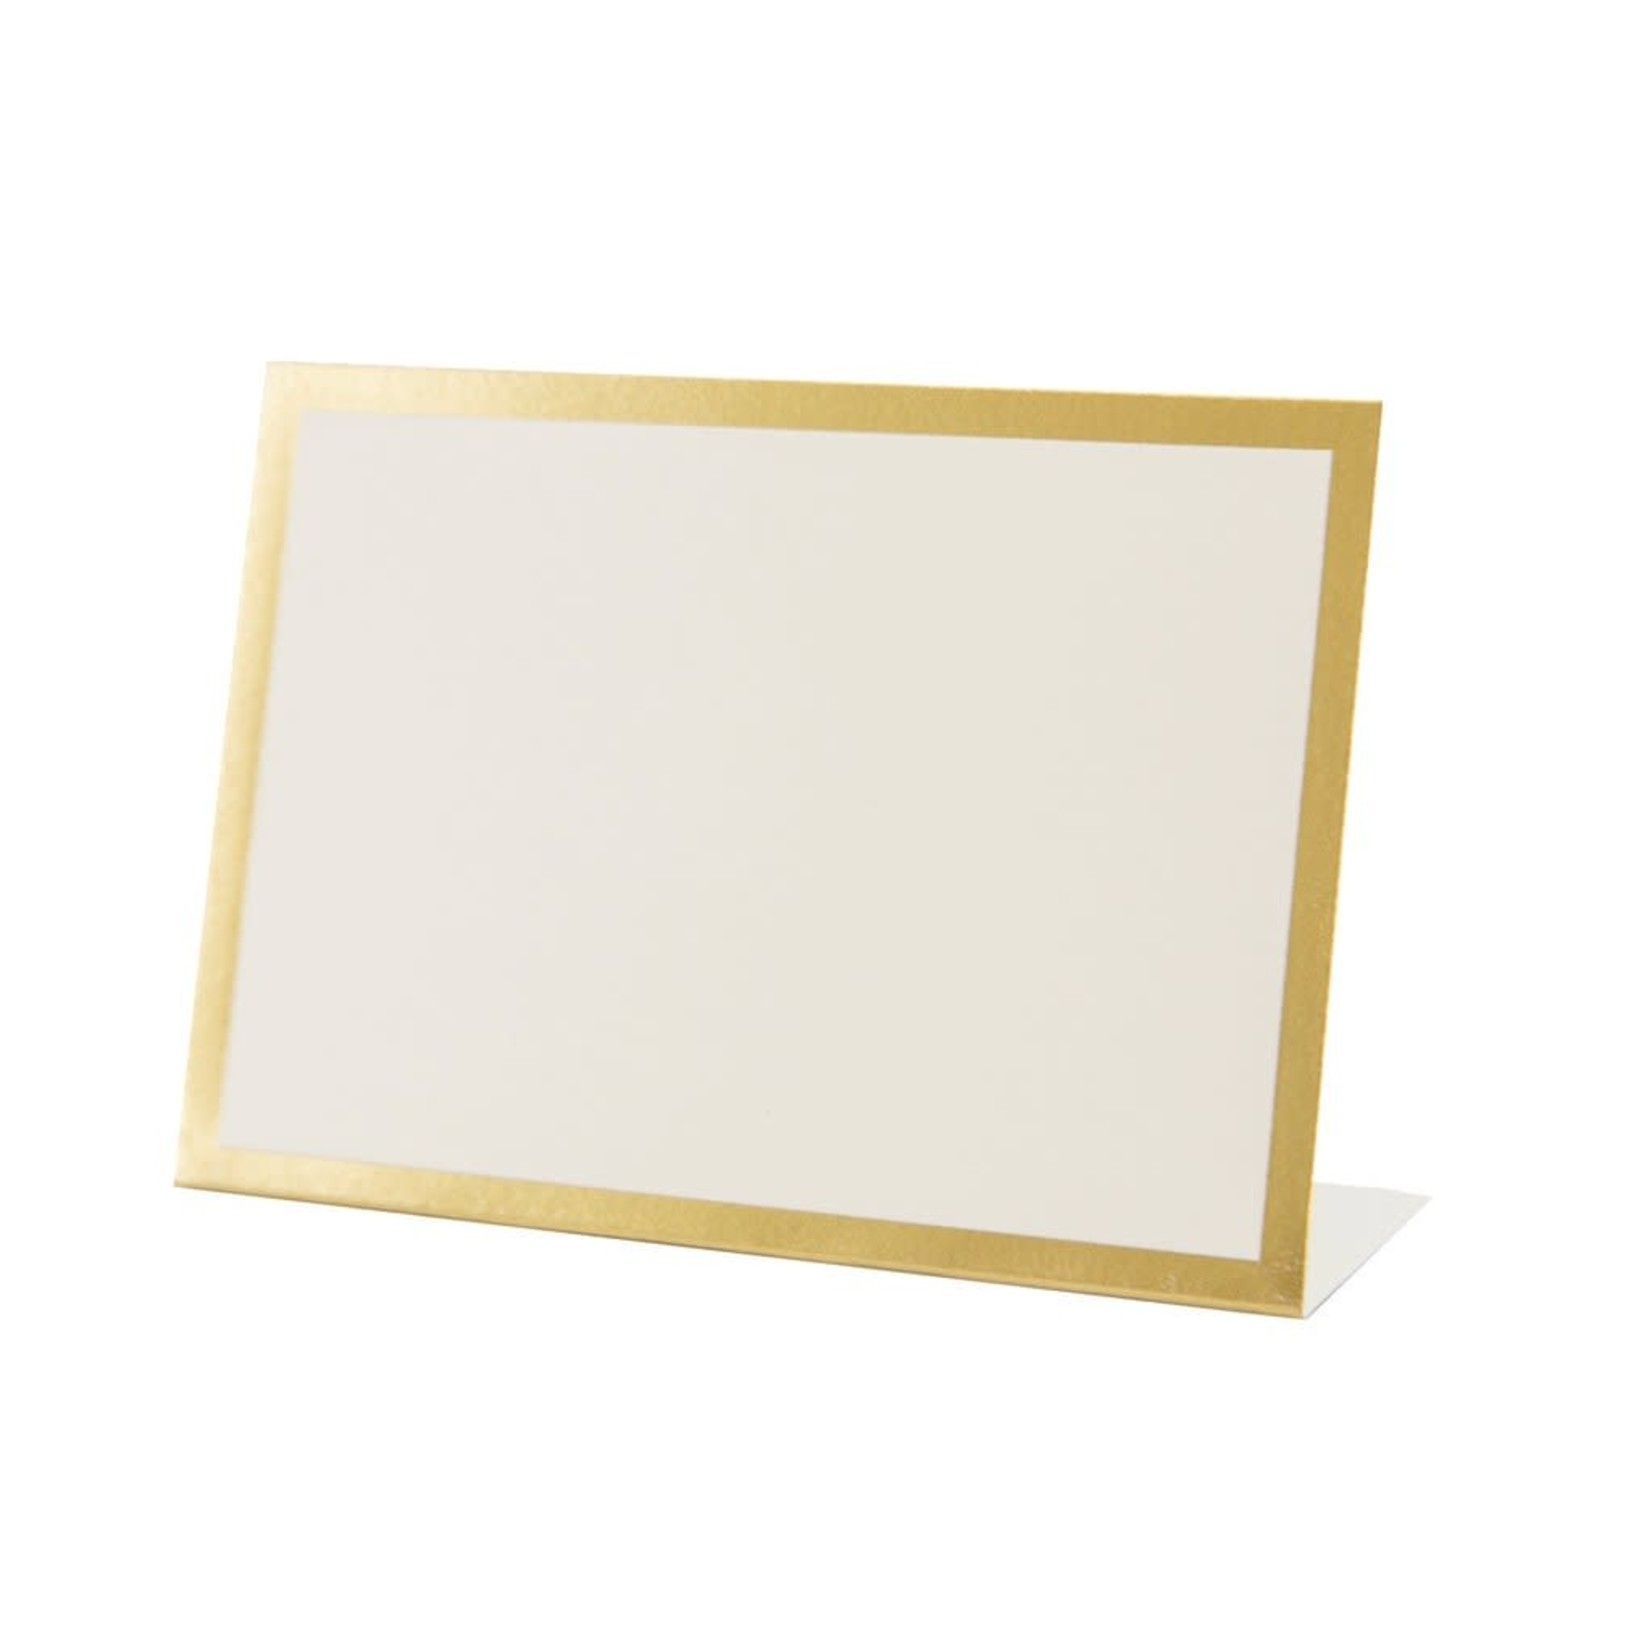 Gold Frame Place Card - Pack of 12 - Bottom Fold